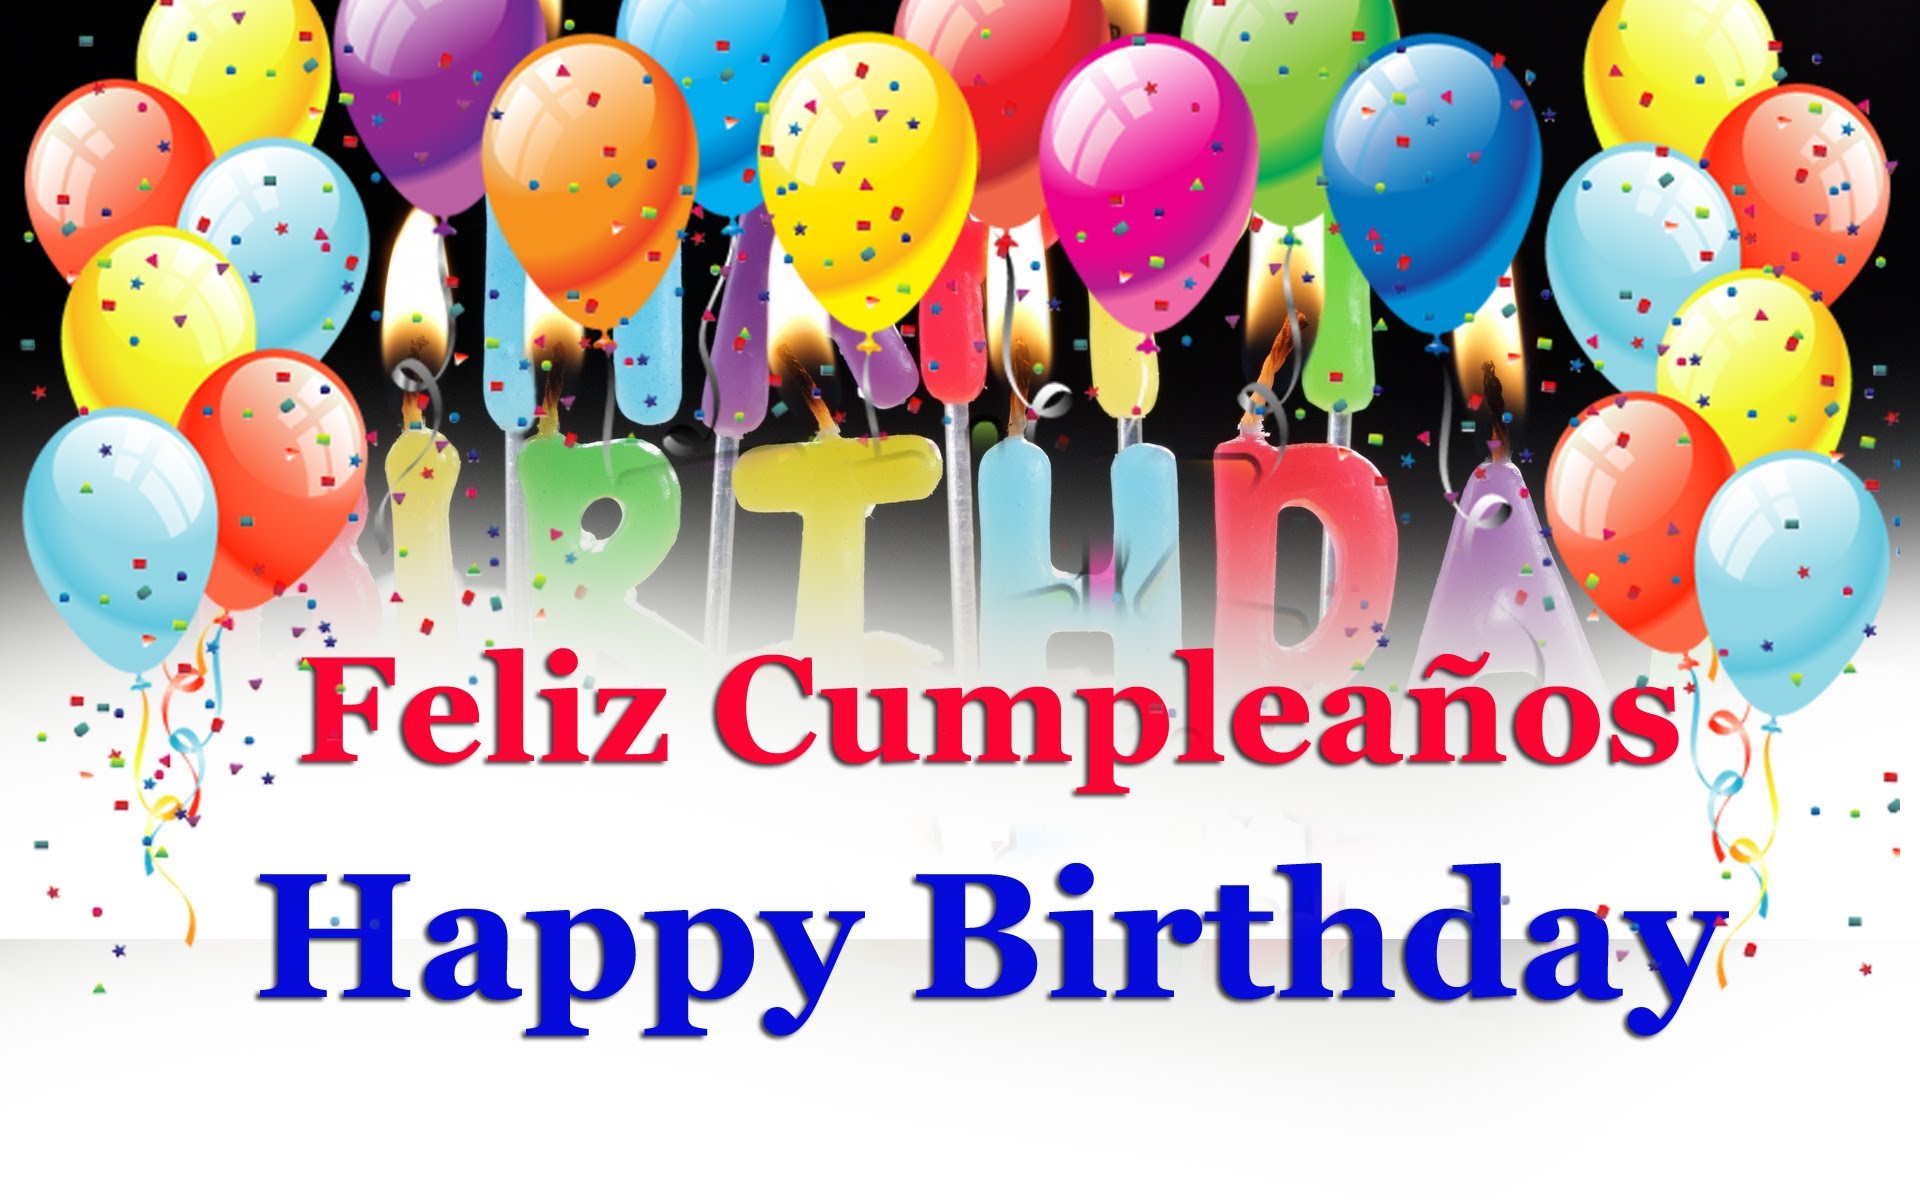 Happy birthday wishes and quotes in Spanish and English – SPANISH TO ENGLISH TRANSLATION